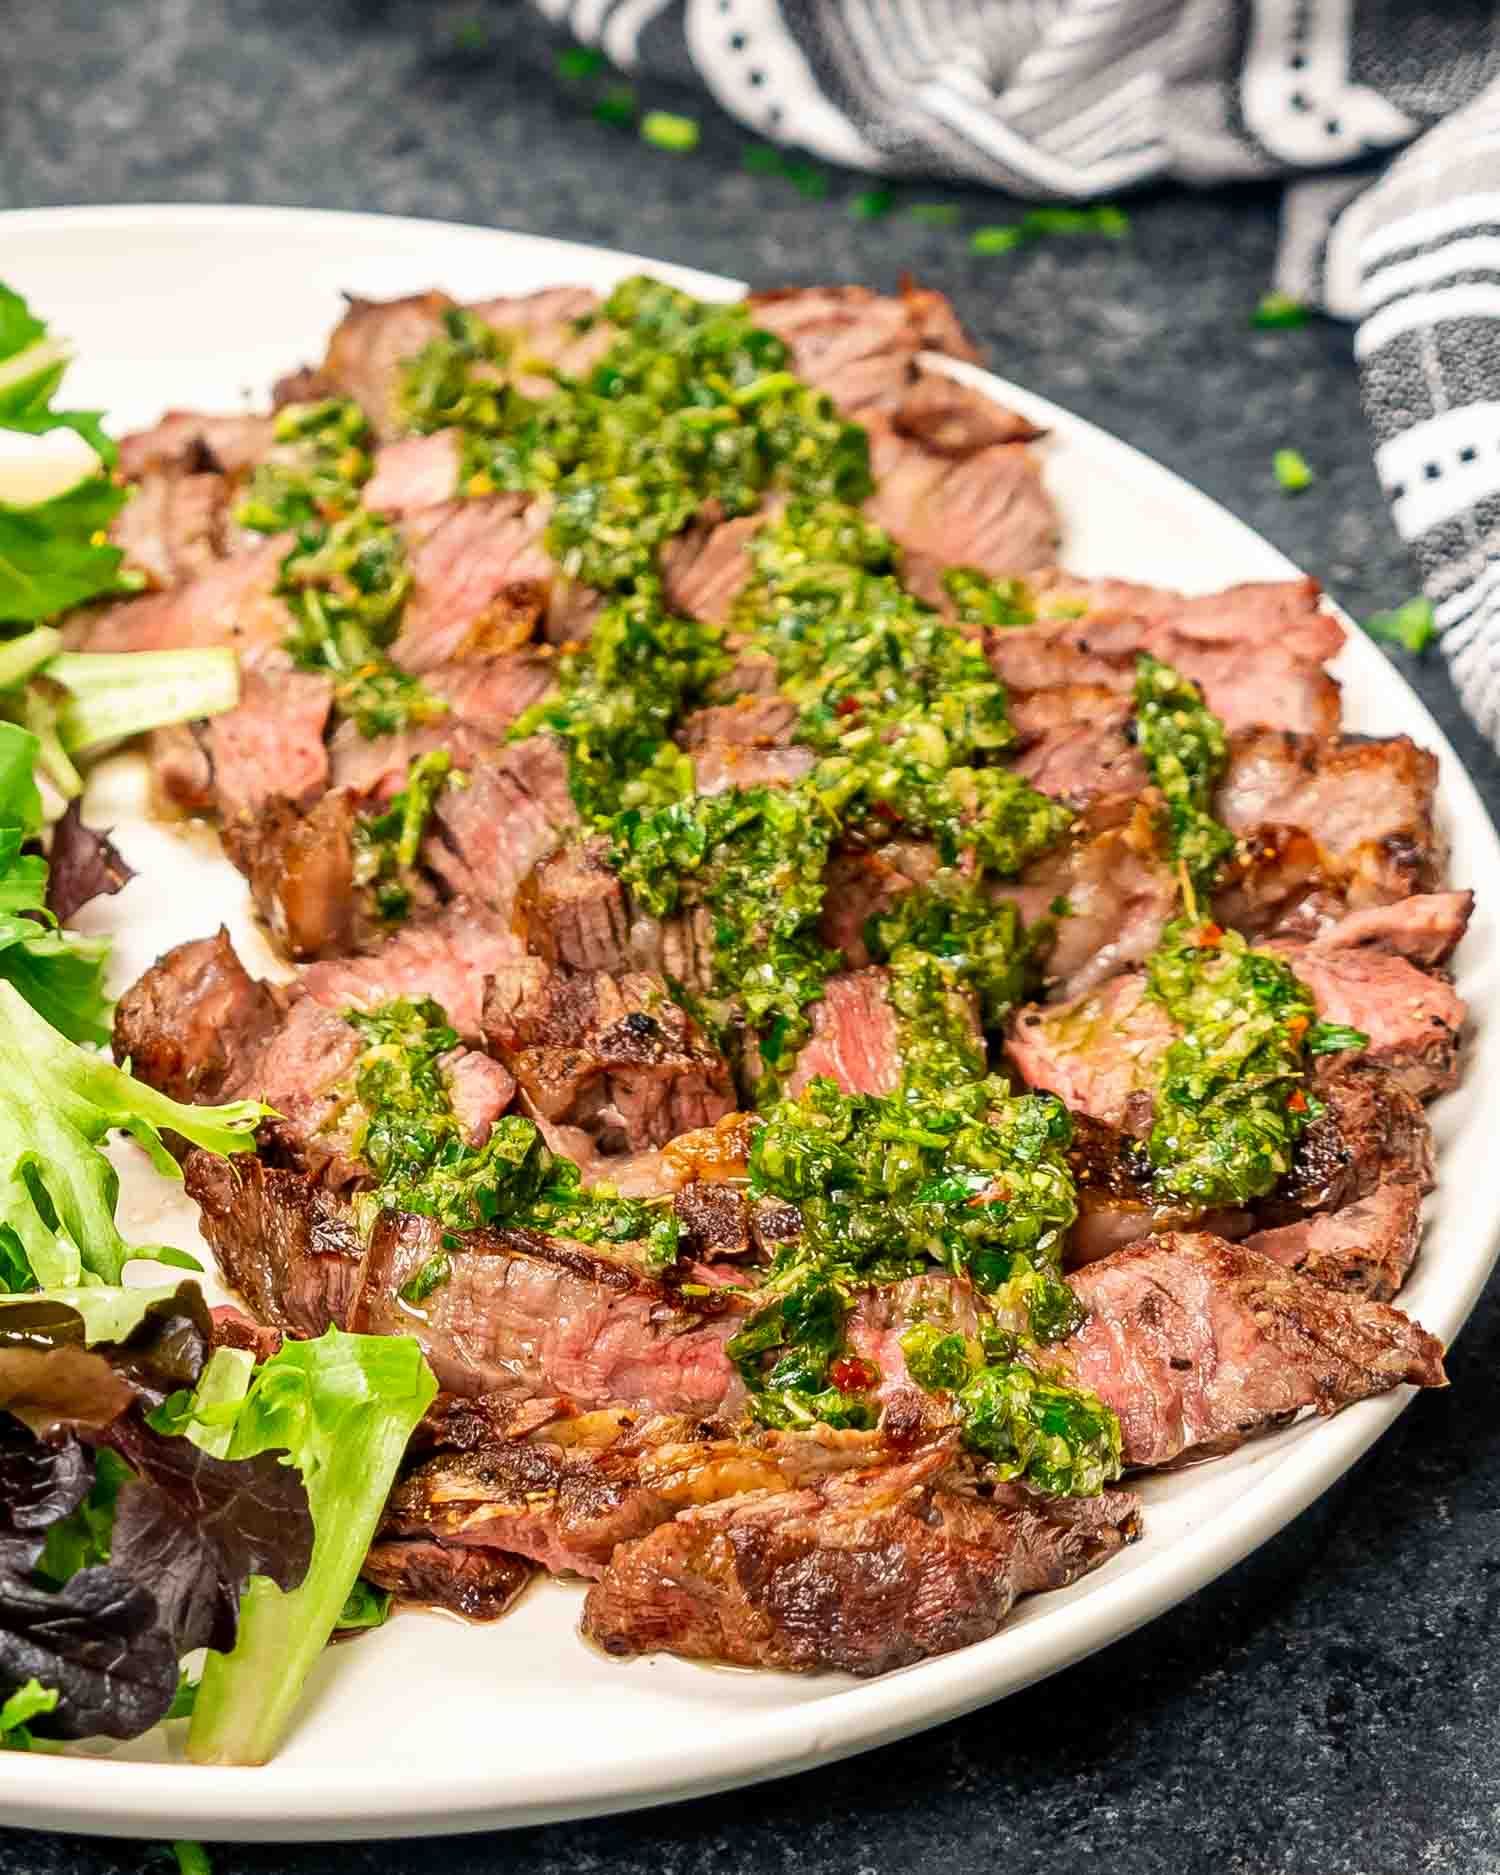 grilled ribeye sliced up drizzled with chimichurri sauce on a white plate along with a tossed green salad.